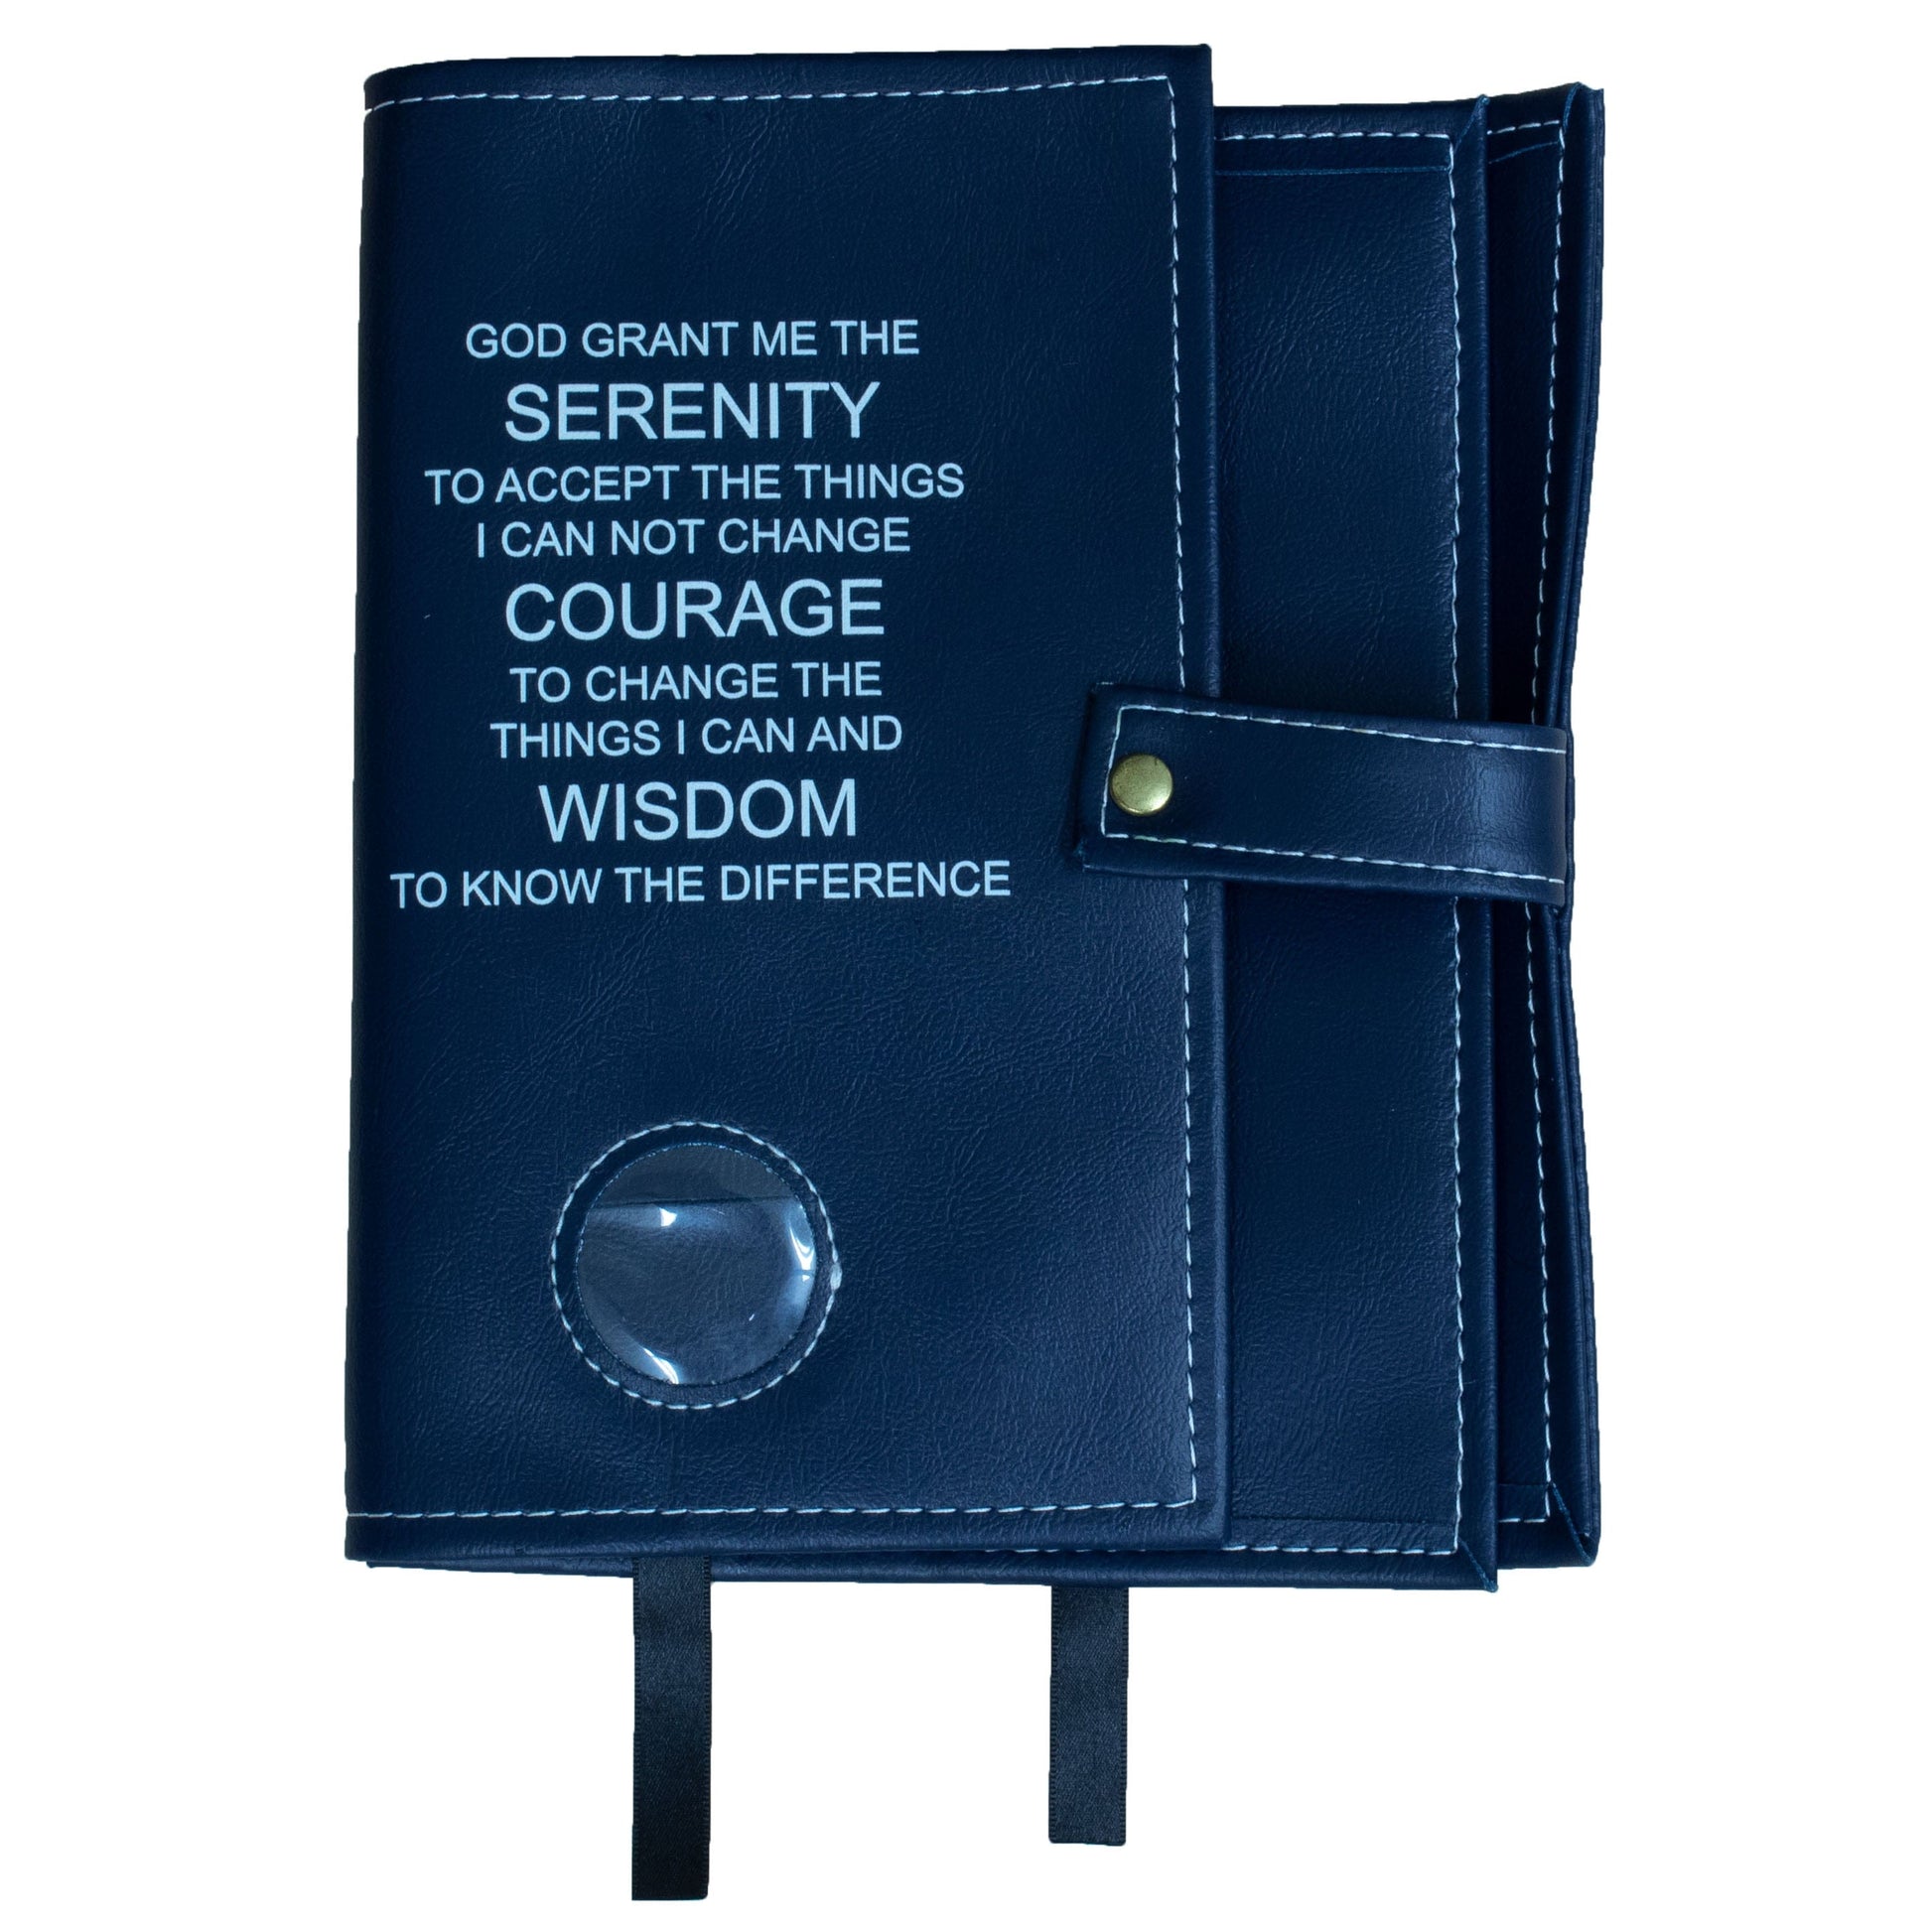 AA Navy Blue Double Book Cover With The Serenity Prayer, With Sobriety Chip Holder